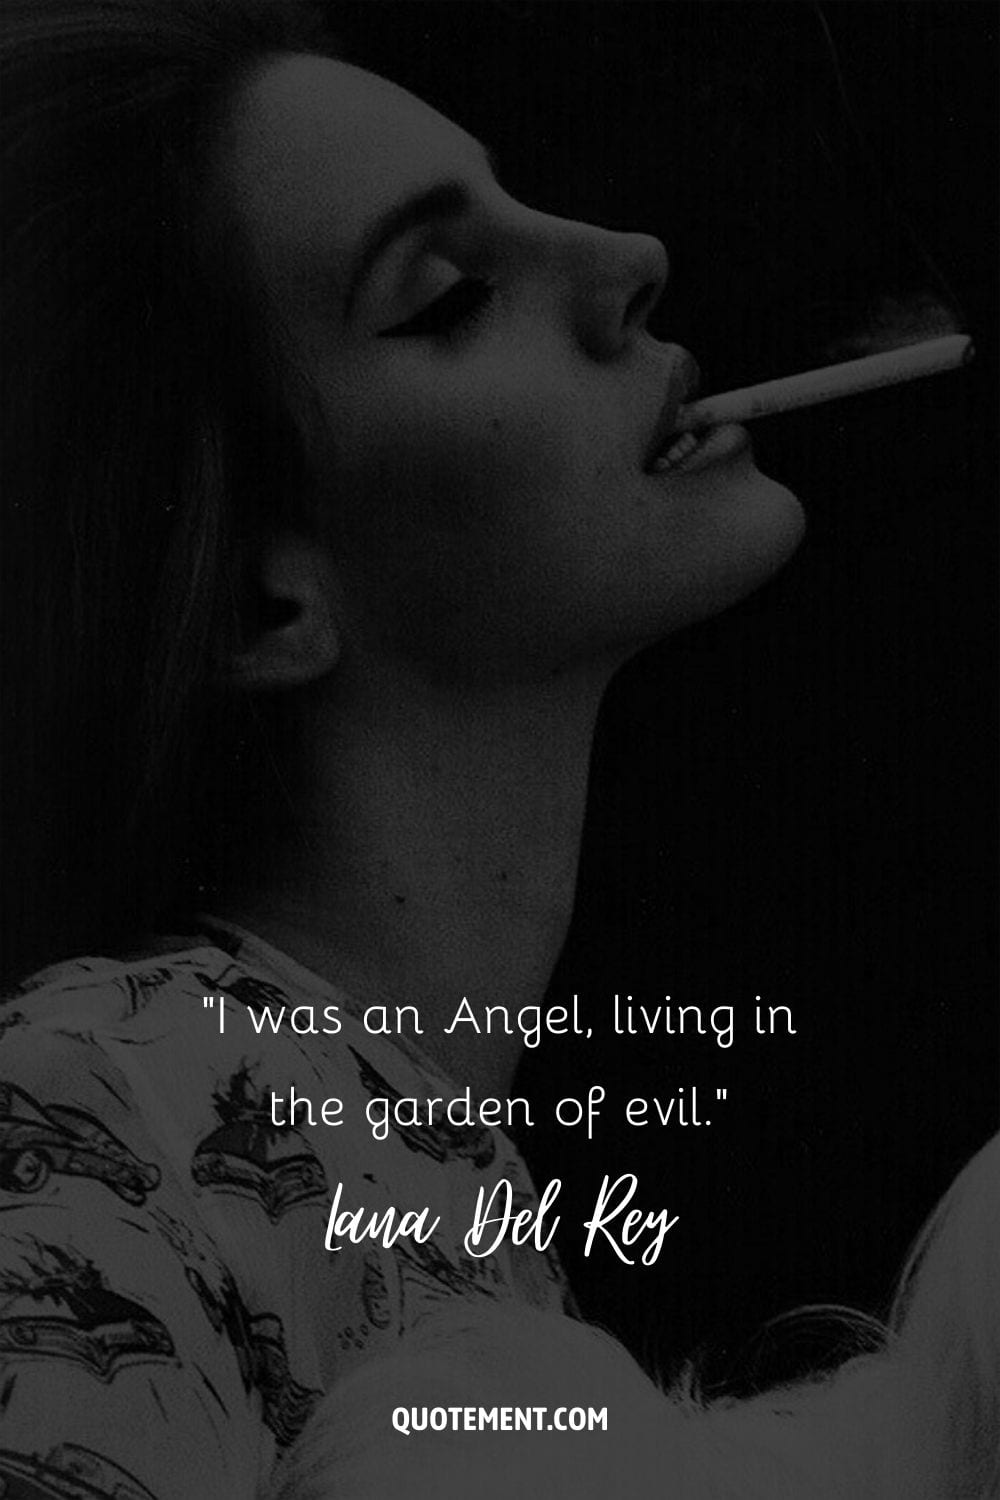 I was an Angel, living in the garden of evil.